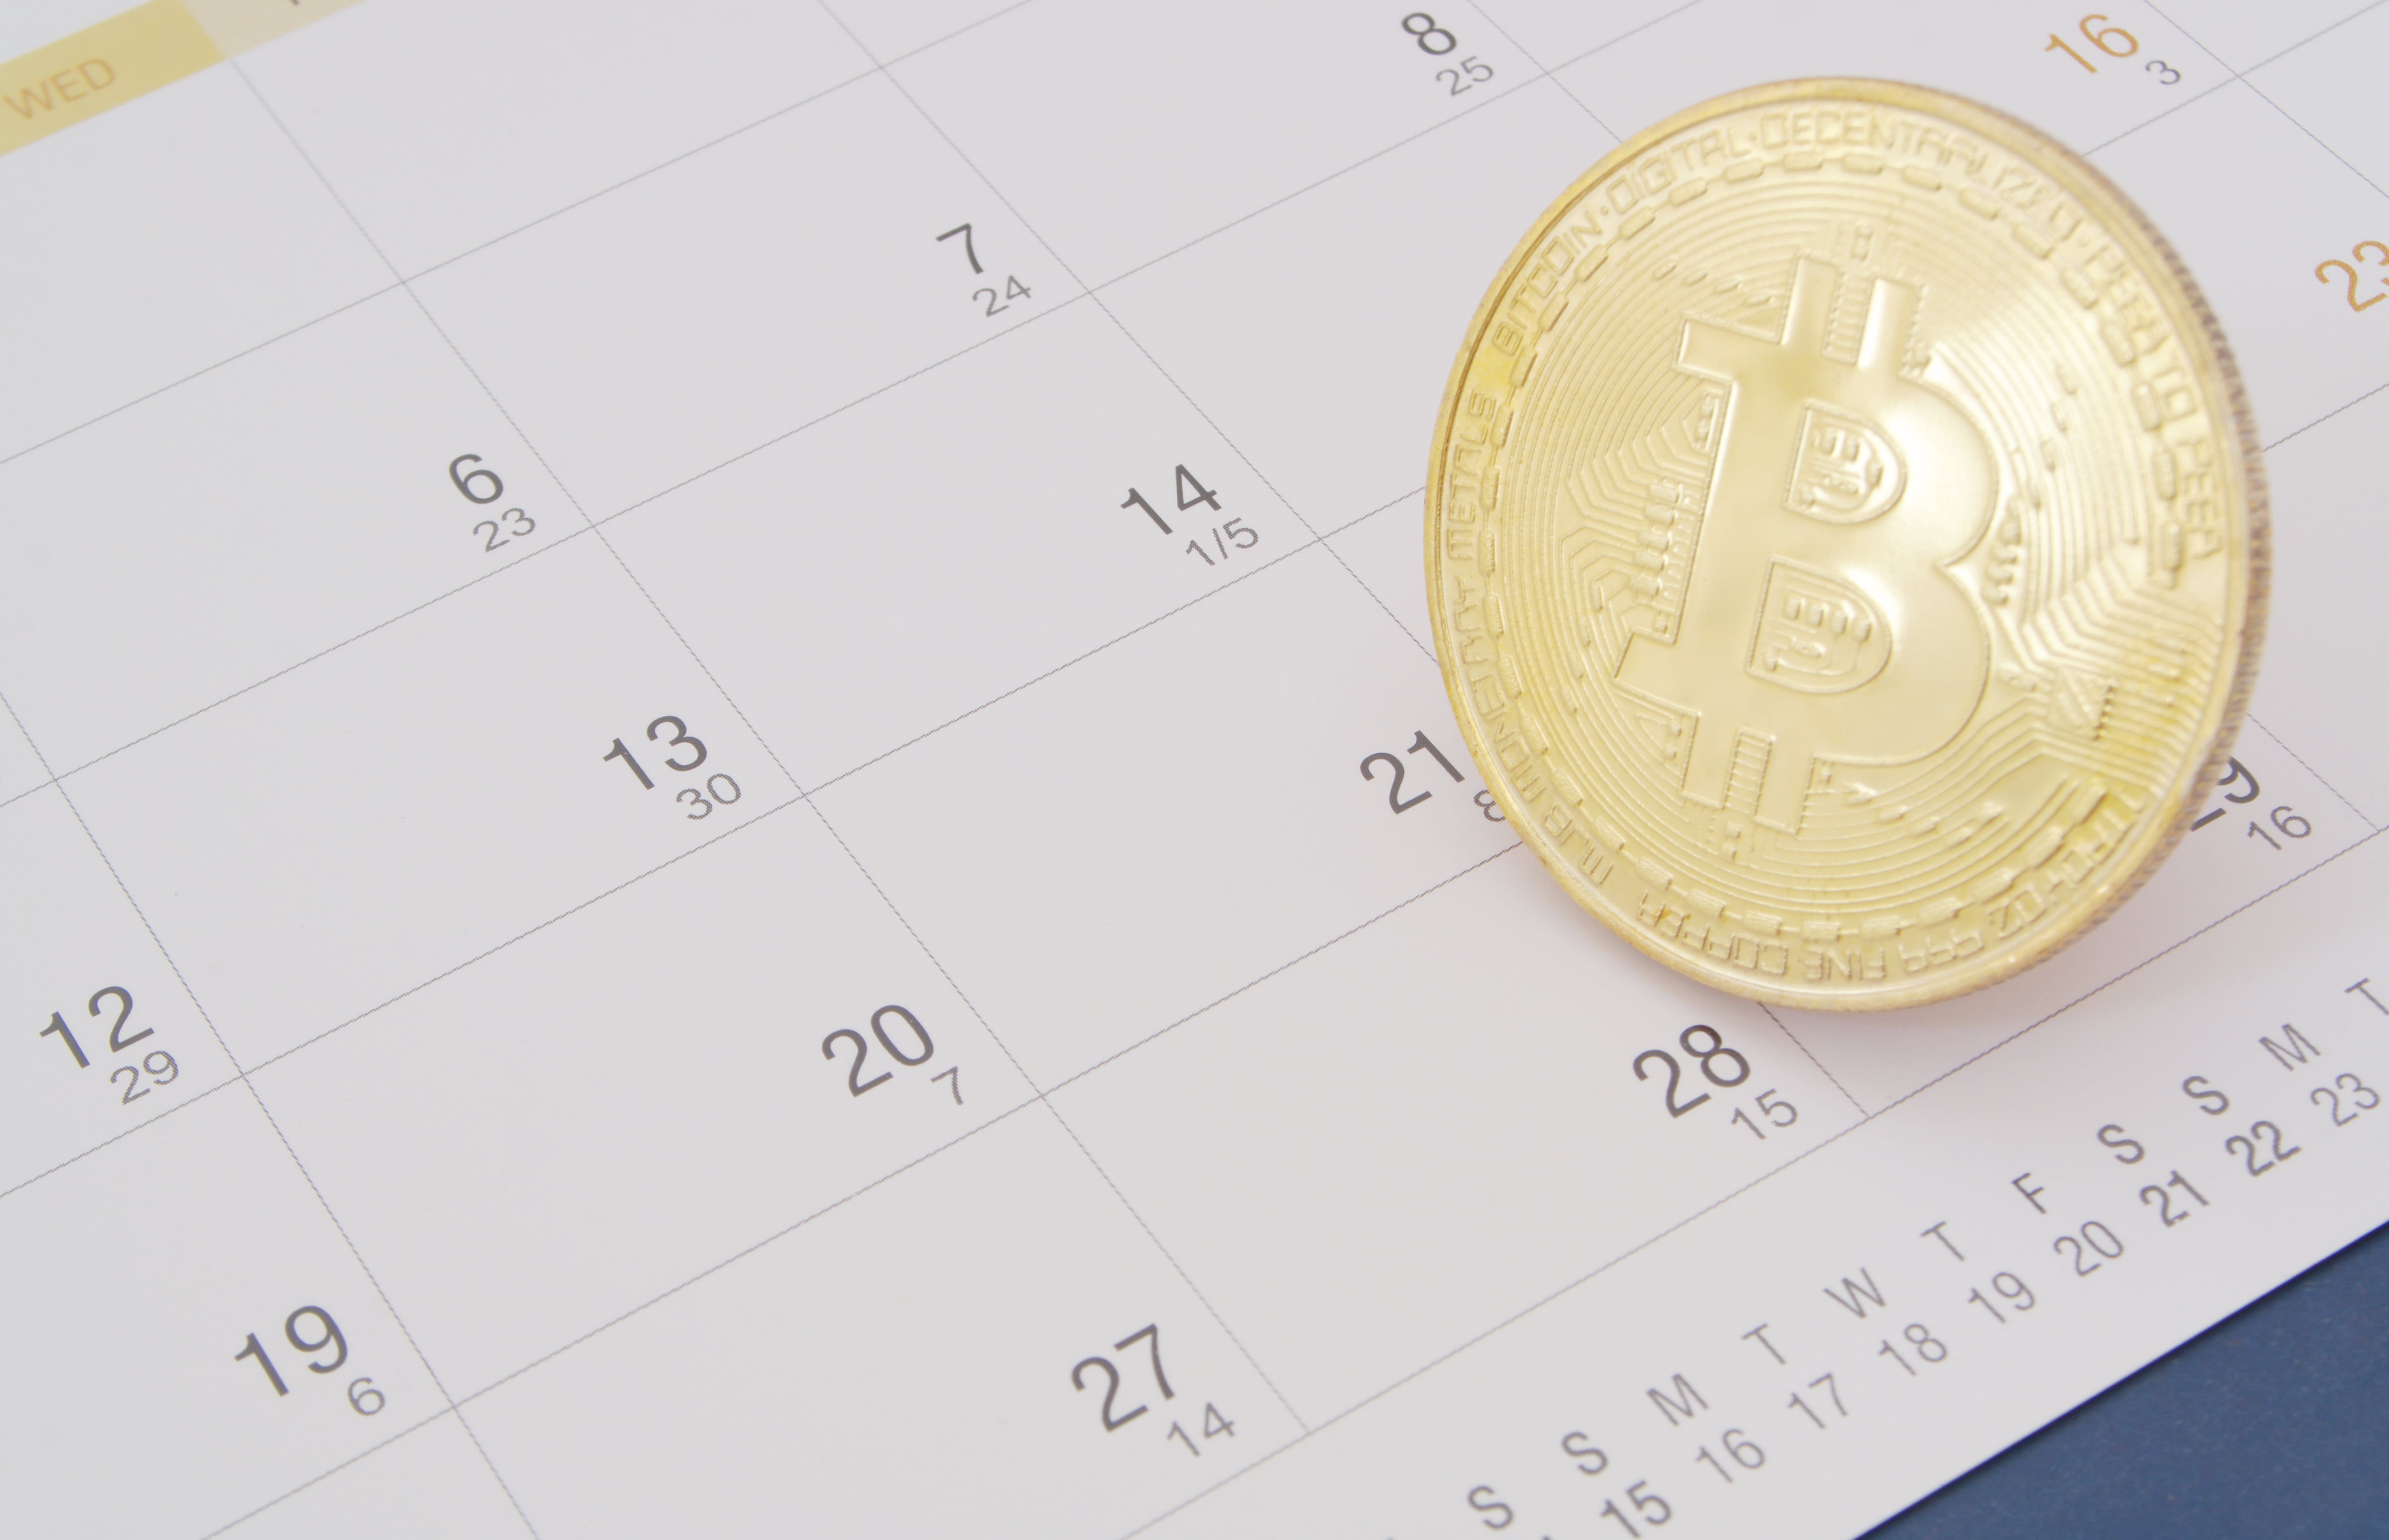 Bitcoin Price Weekly Close Above $11,500 Would Be First in Nearly 18 Months